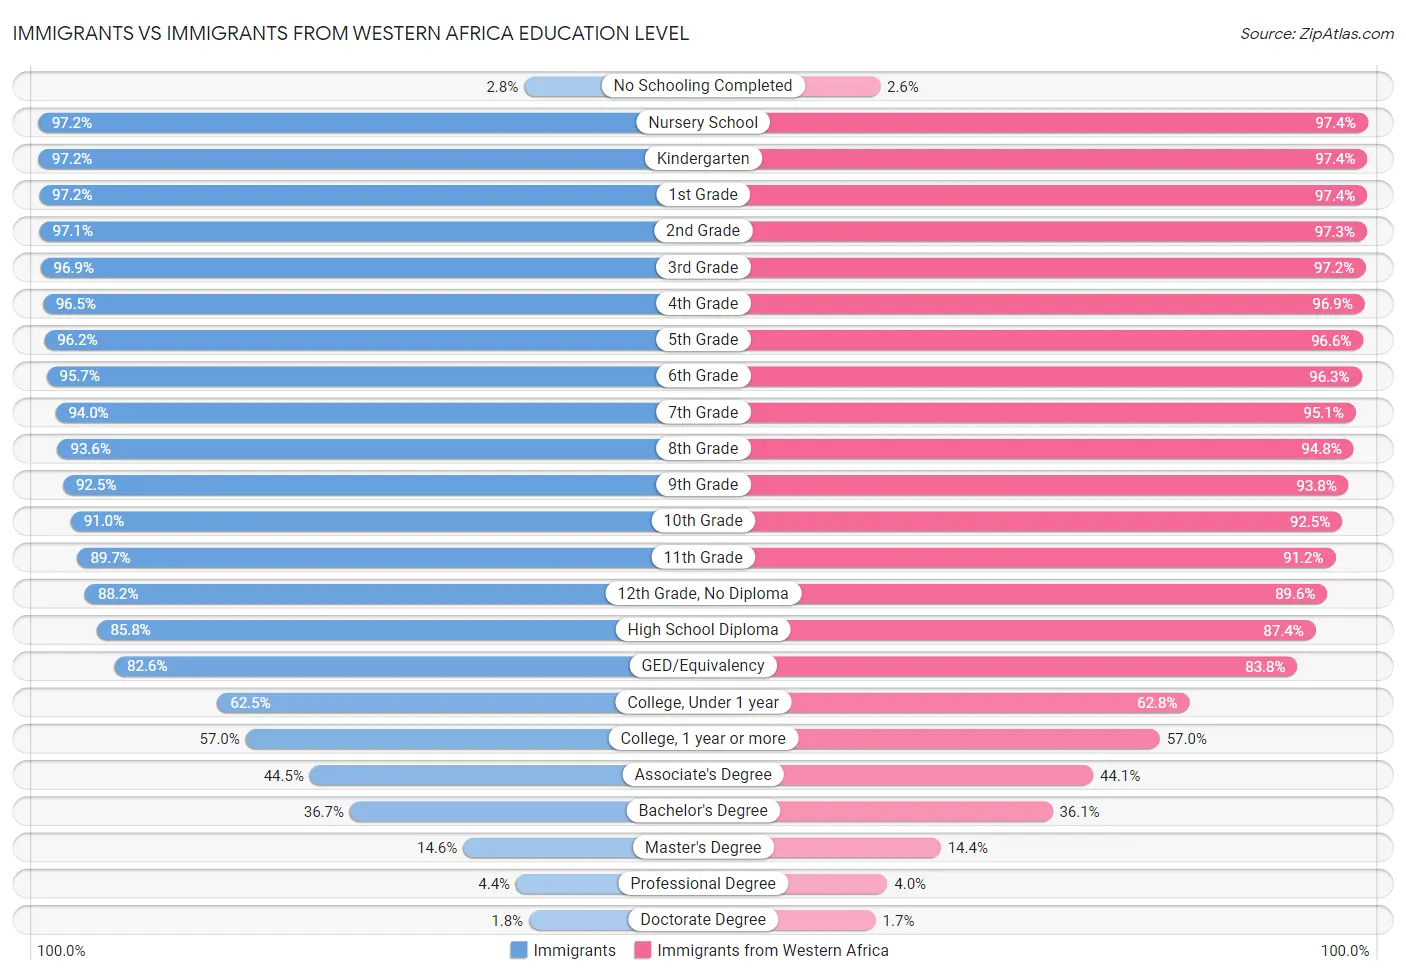 Immigrants vs Immigrants from Western Africa Education Level